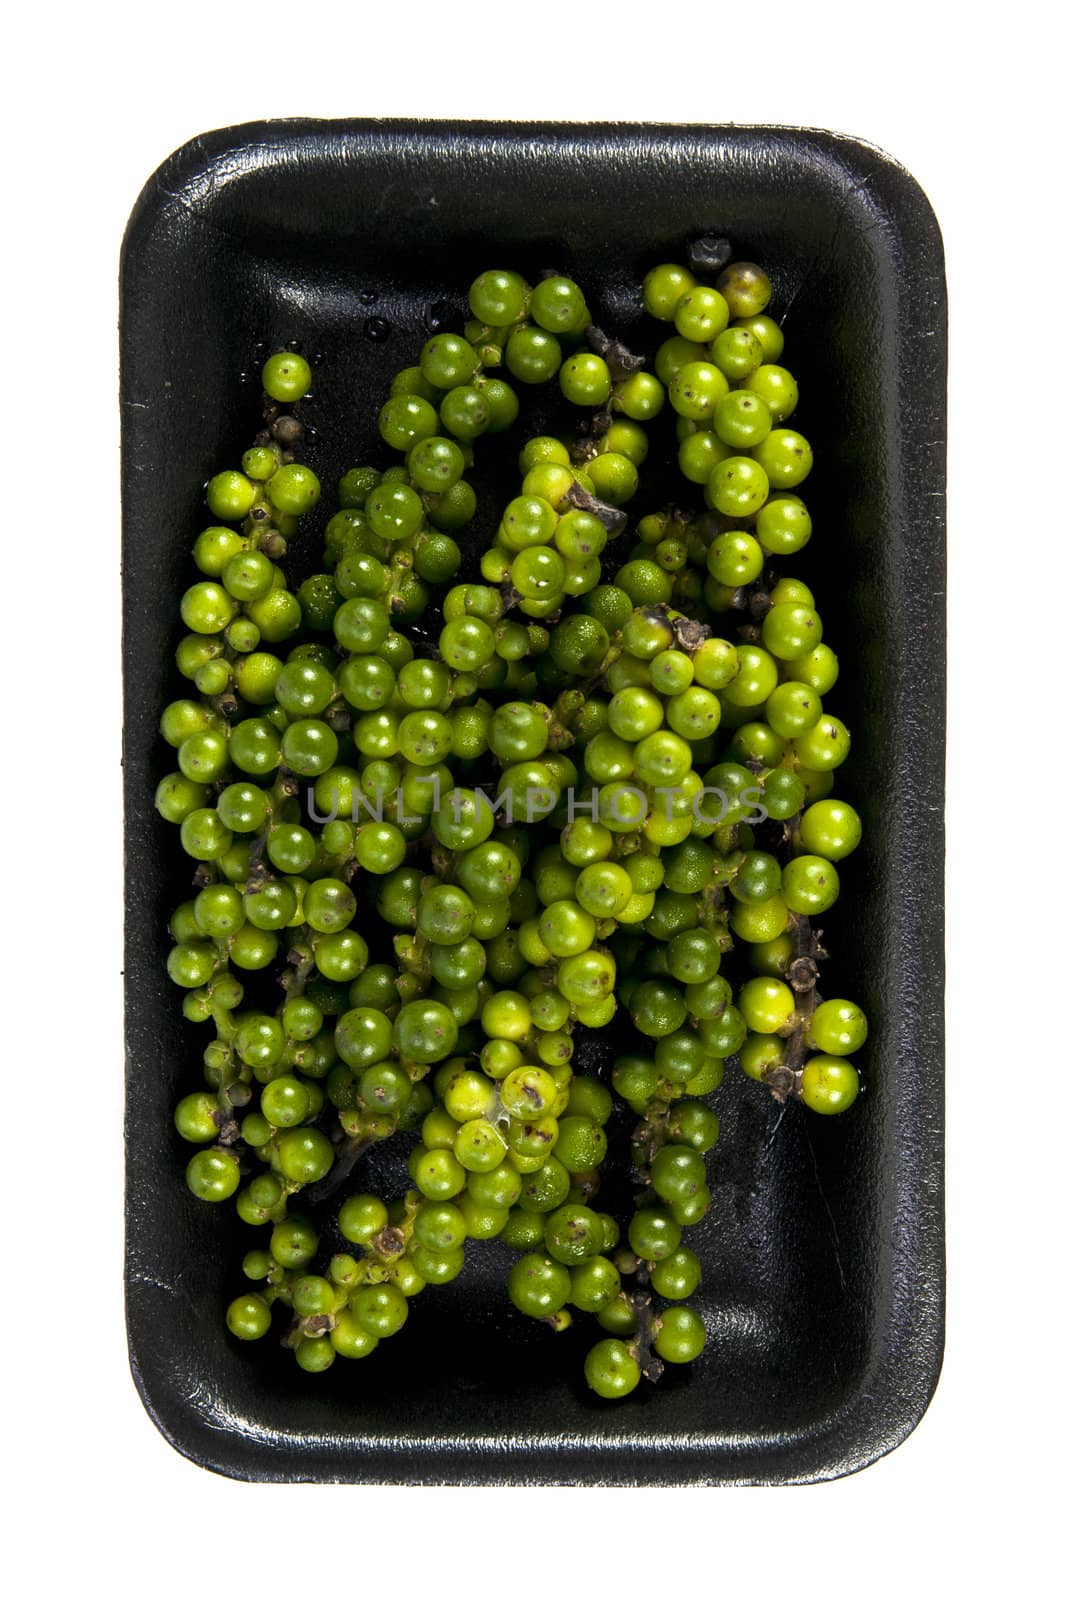 Green pepper cone with black plate on the white background